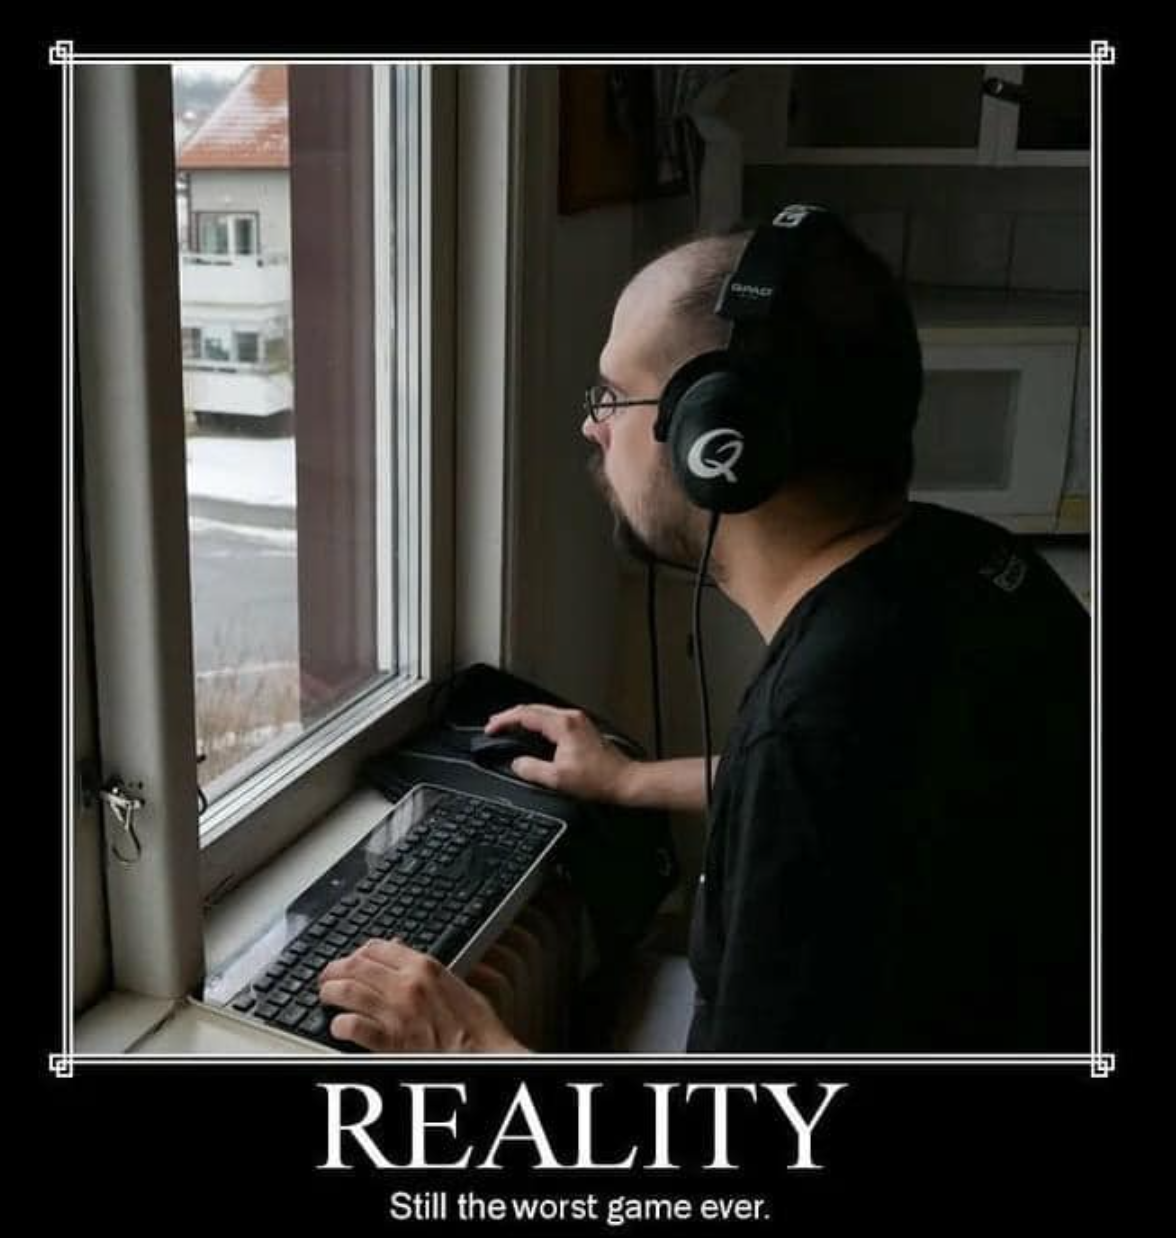 funny gaming memes - reality worst game ever meme - Q Reality Still the worst game ever.